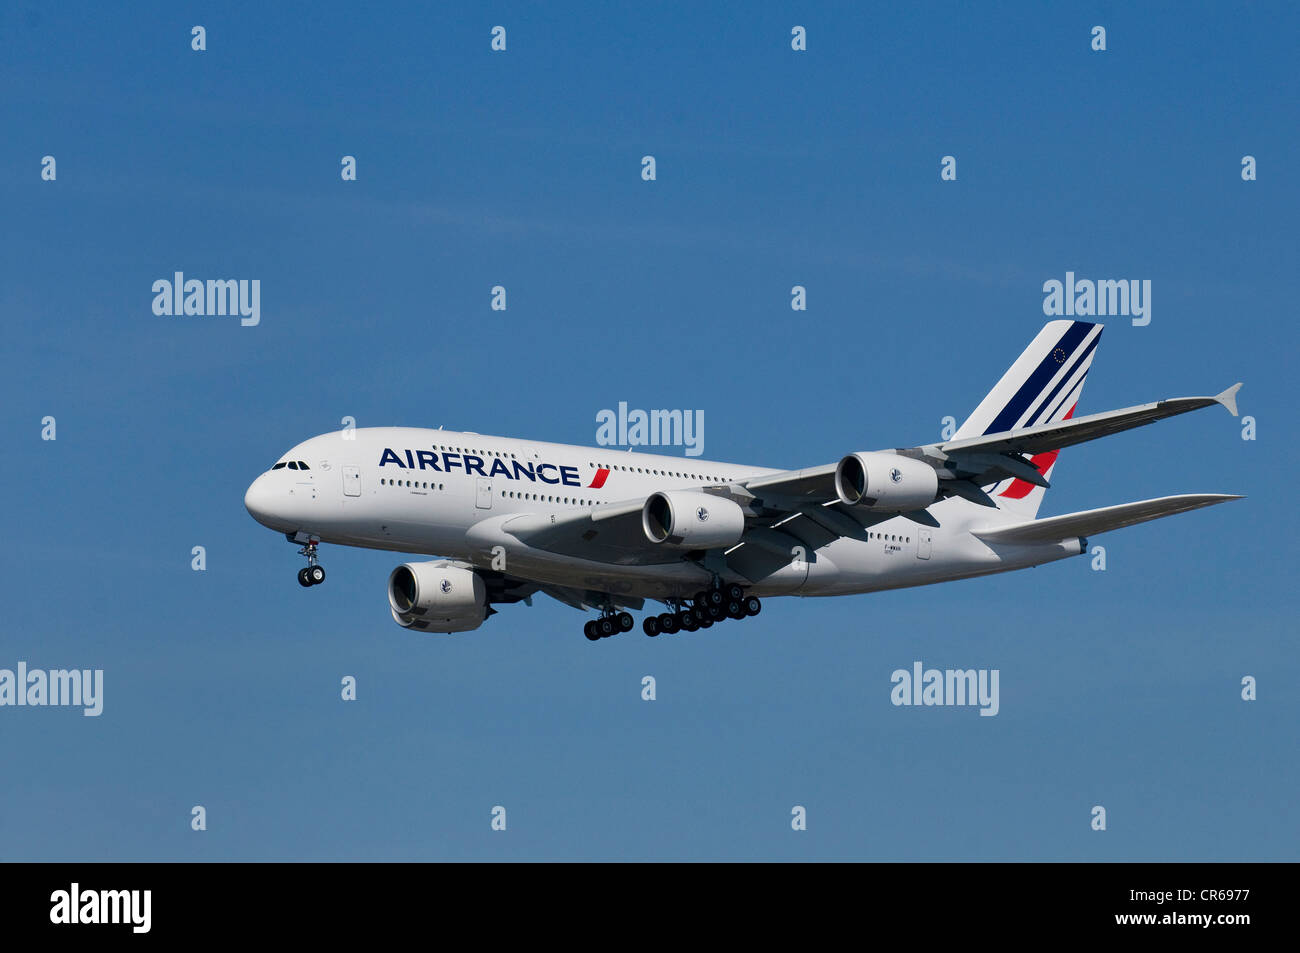 Air France passenger plane in flight with extended landing gear, Airbus A 380 super jumbo Stock Photo